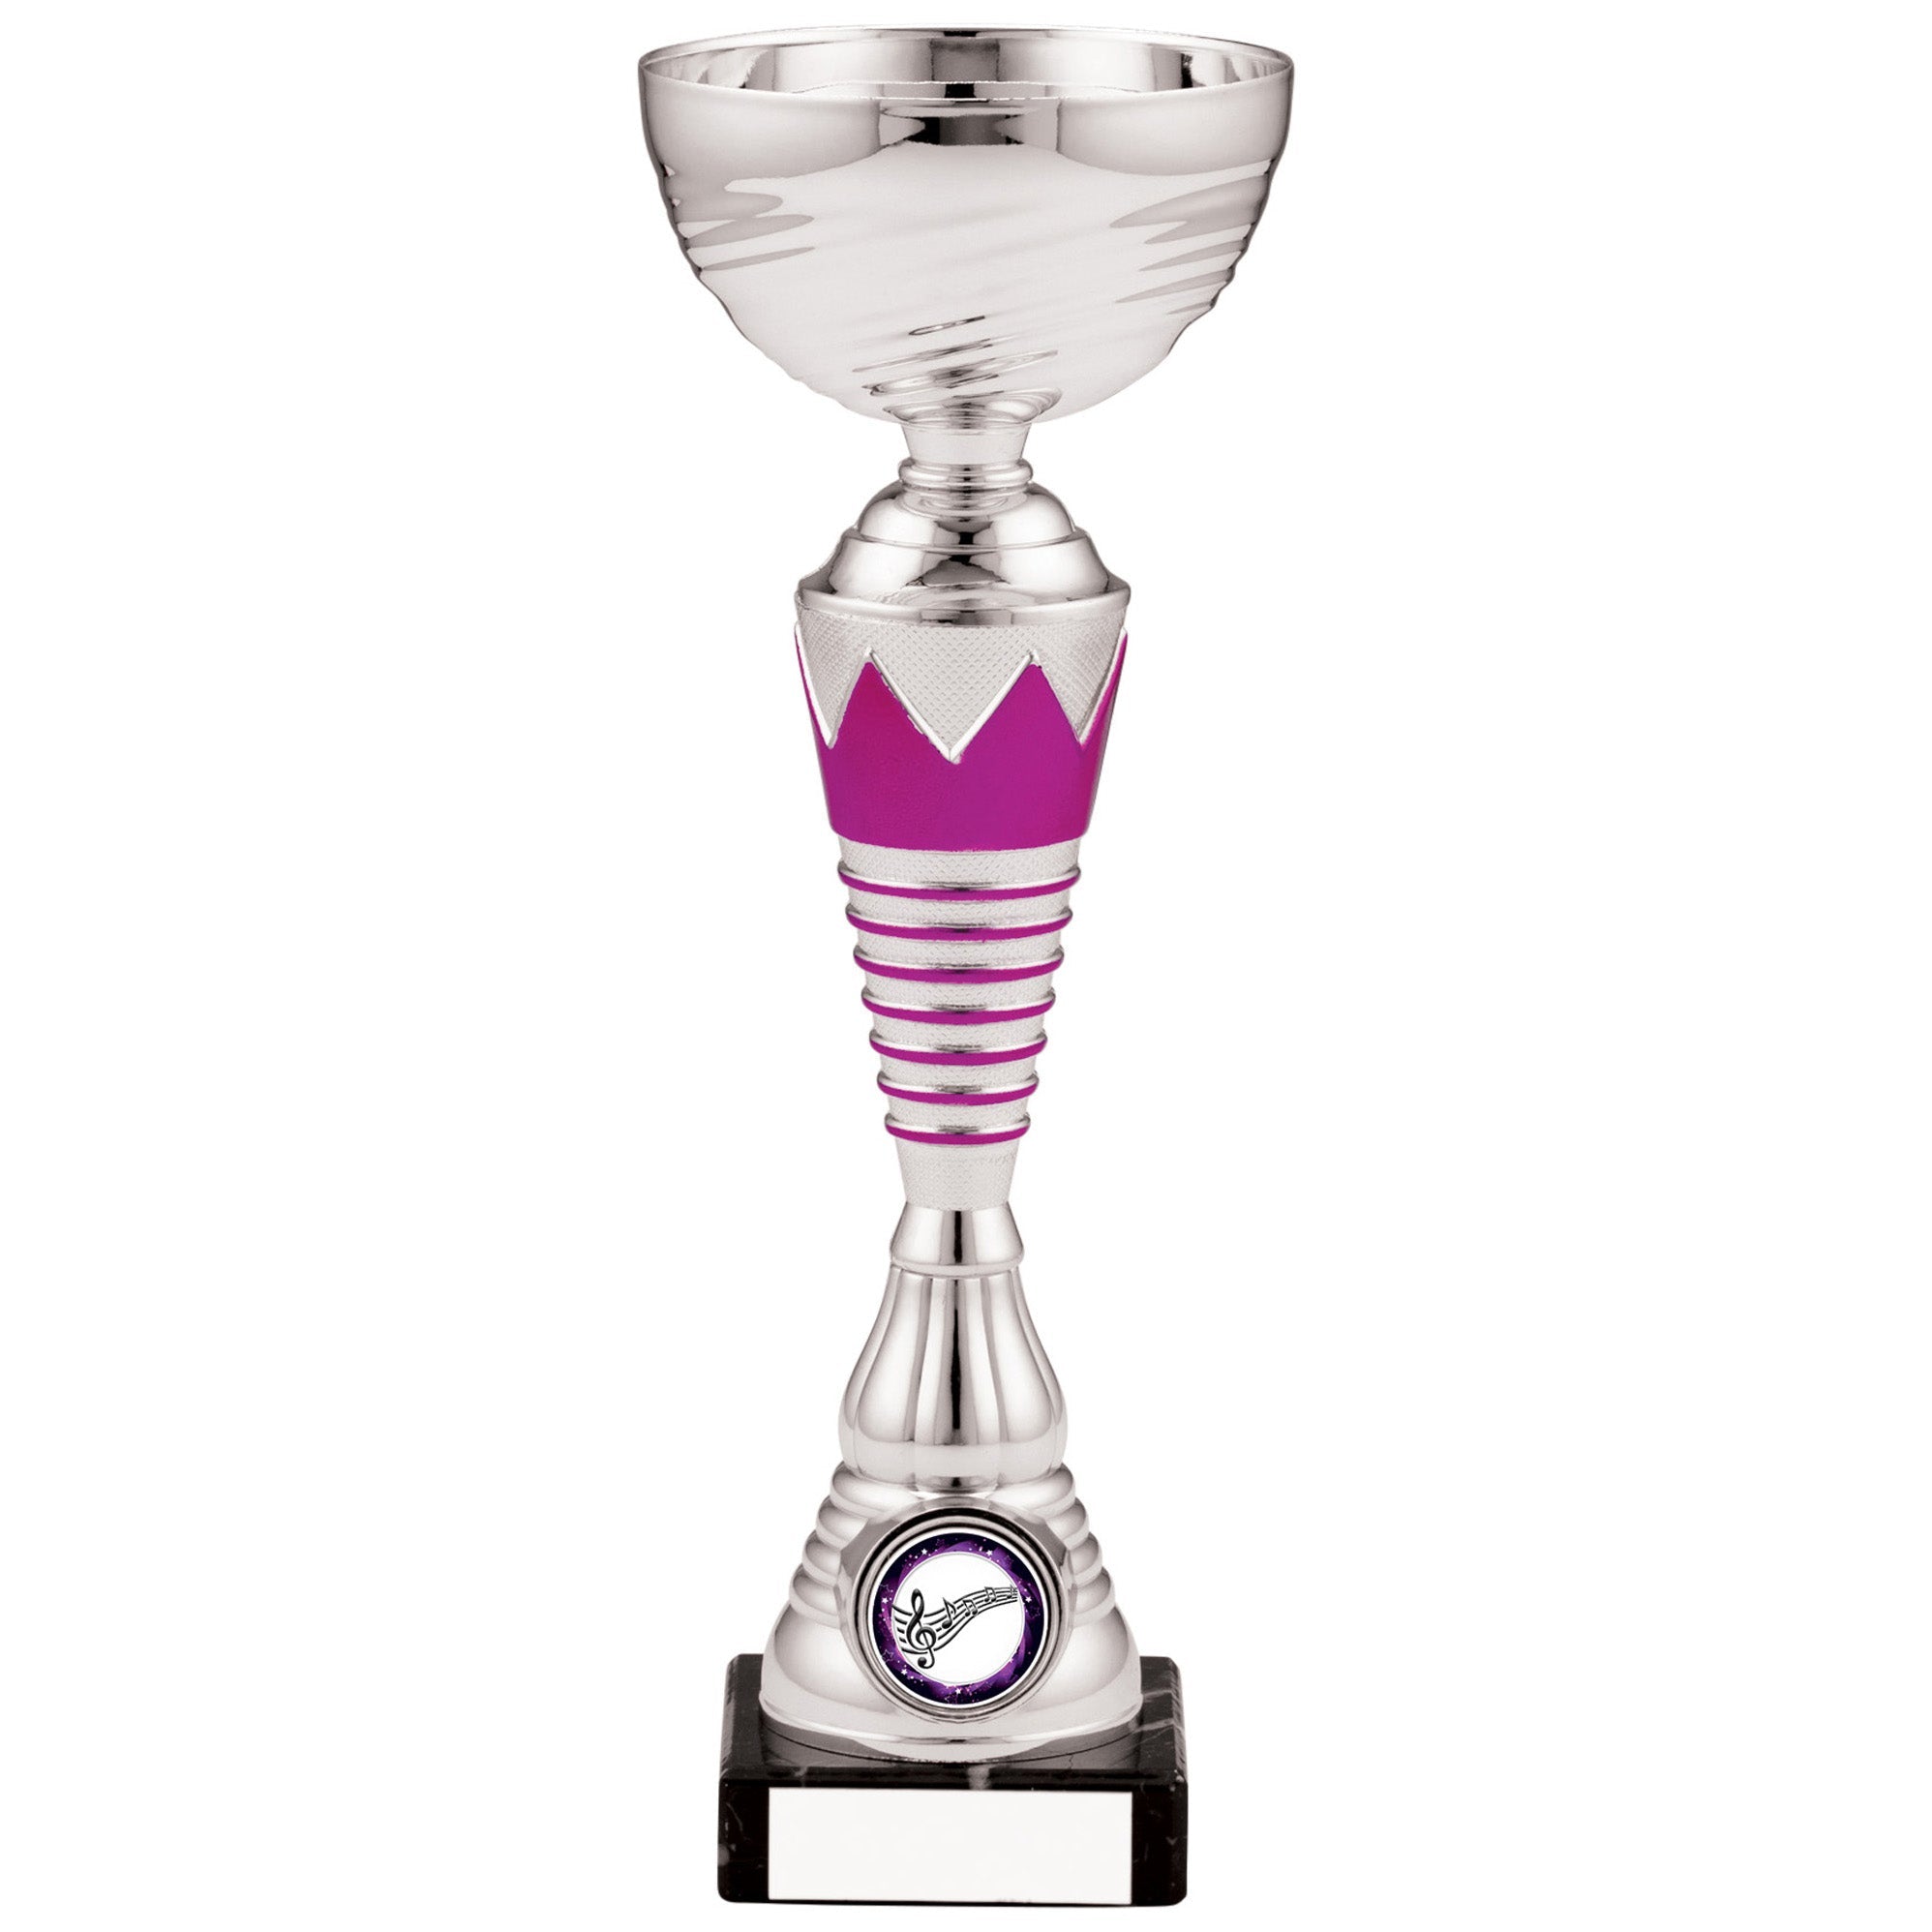 Silver Trophy Cup with Pink Crown and Rings Design